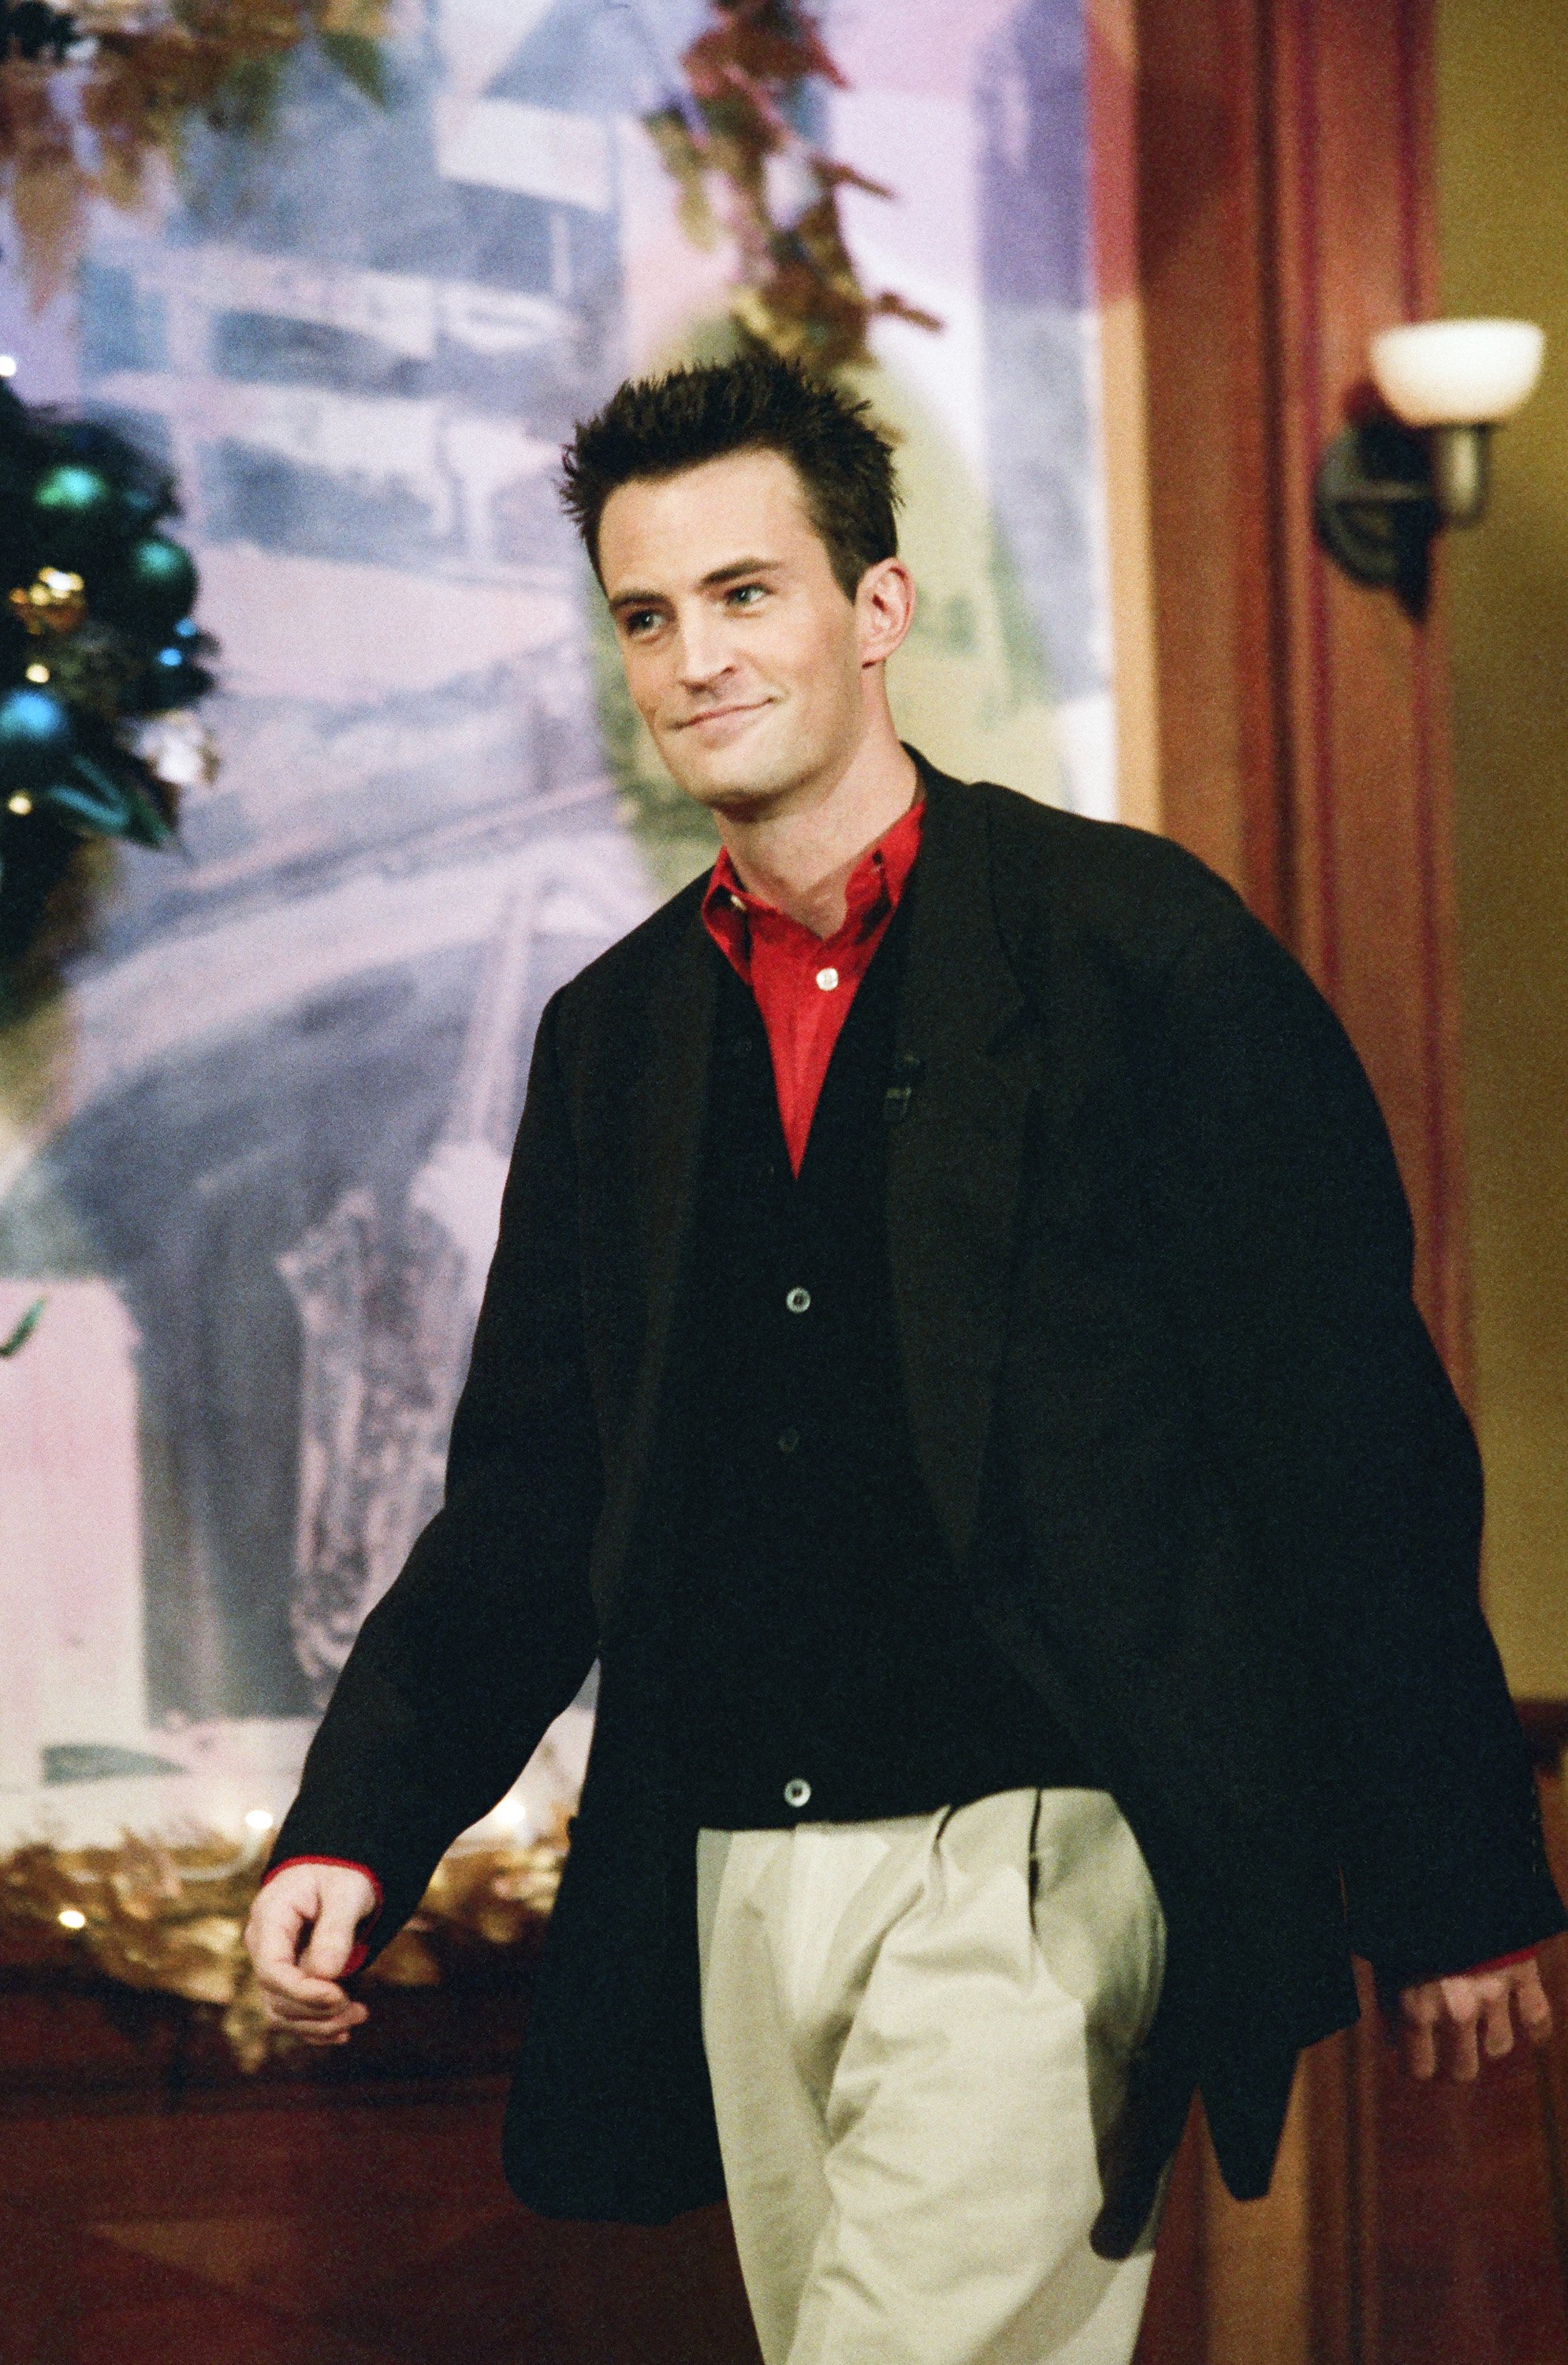 Matthew Perry appears on "The Tonight Show with Jay Leno" on December 18, 1996 | Source: Getty Images